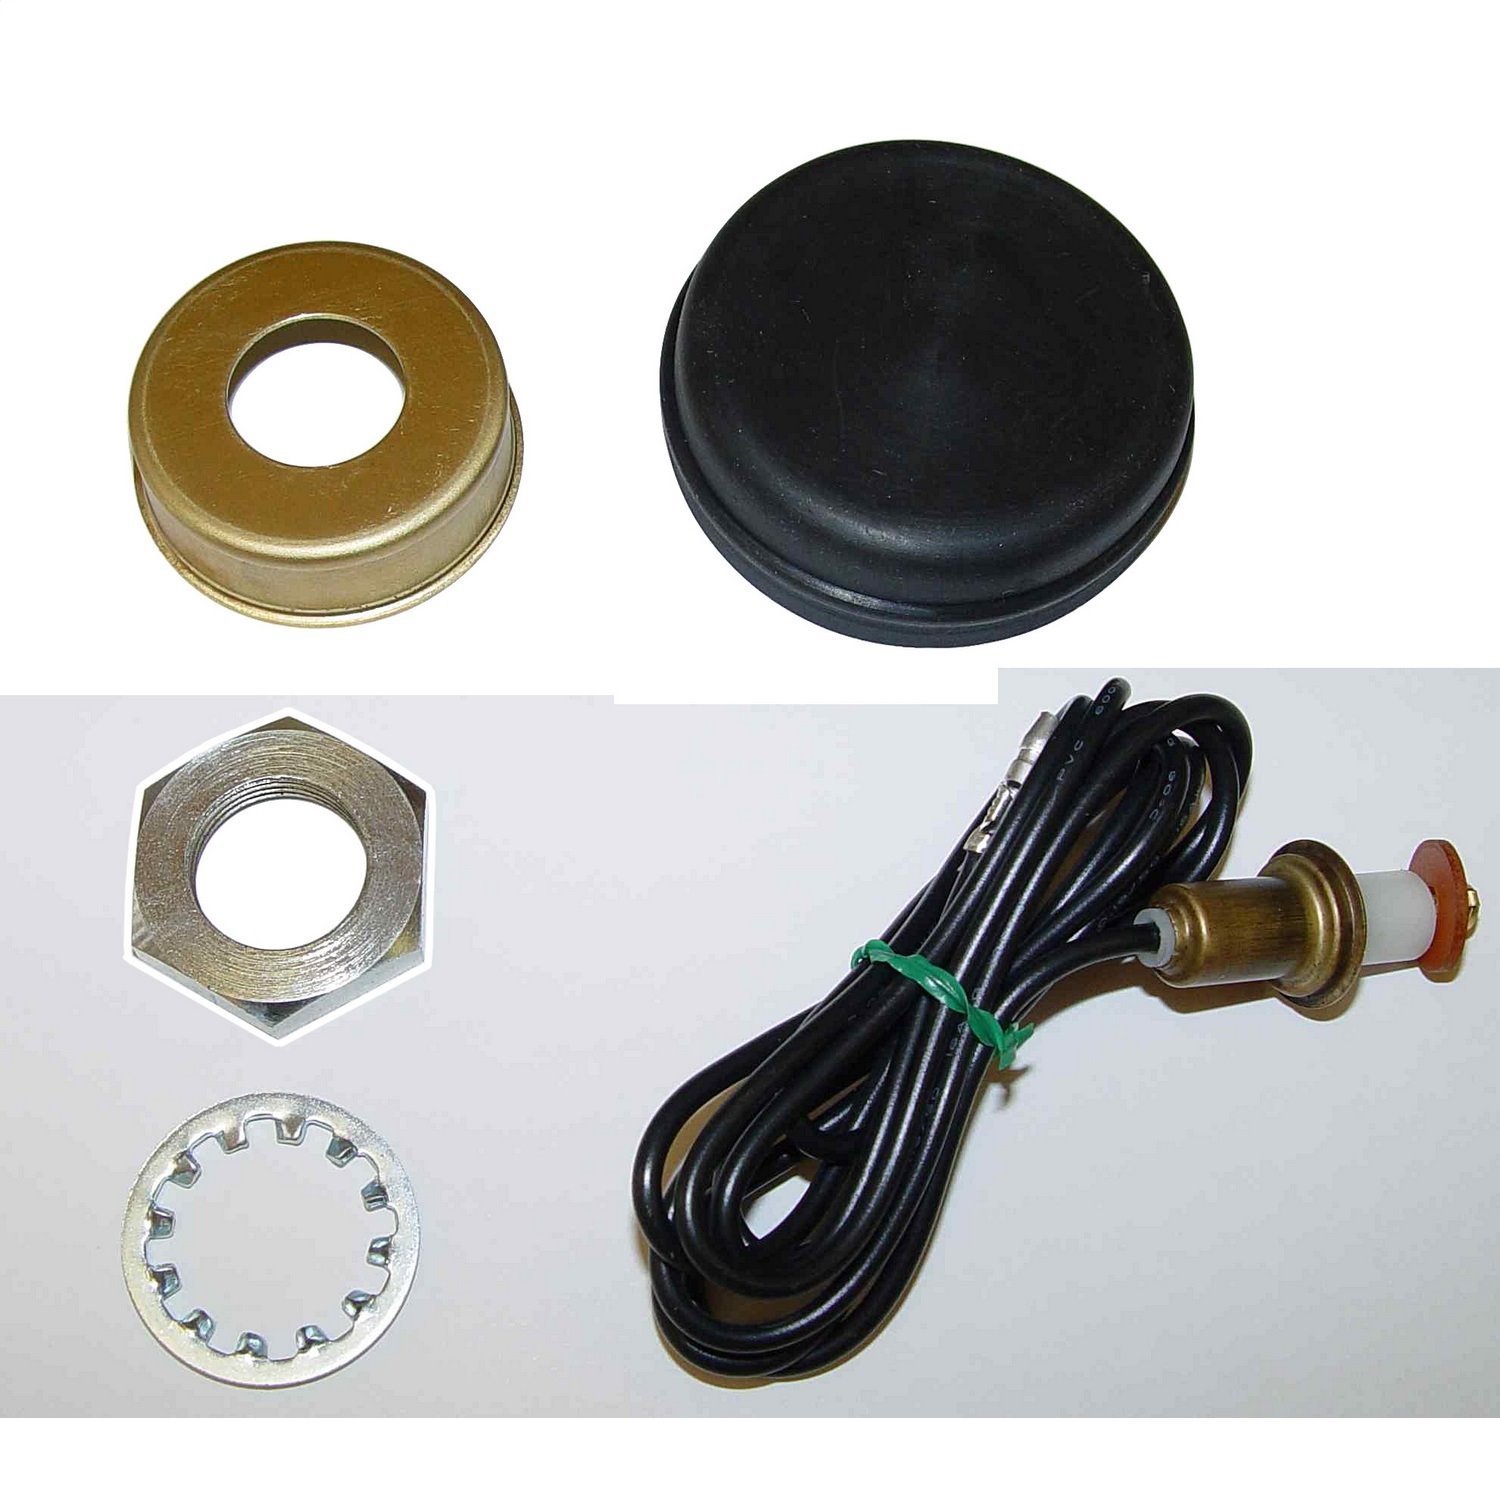 Replacement horn button kit from Omix-ADA, Fits 60-75 Jeep CJ5 and CJ6 kit includes horn button wiring and nut.